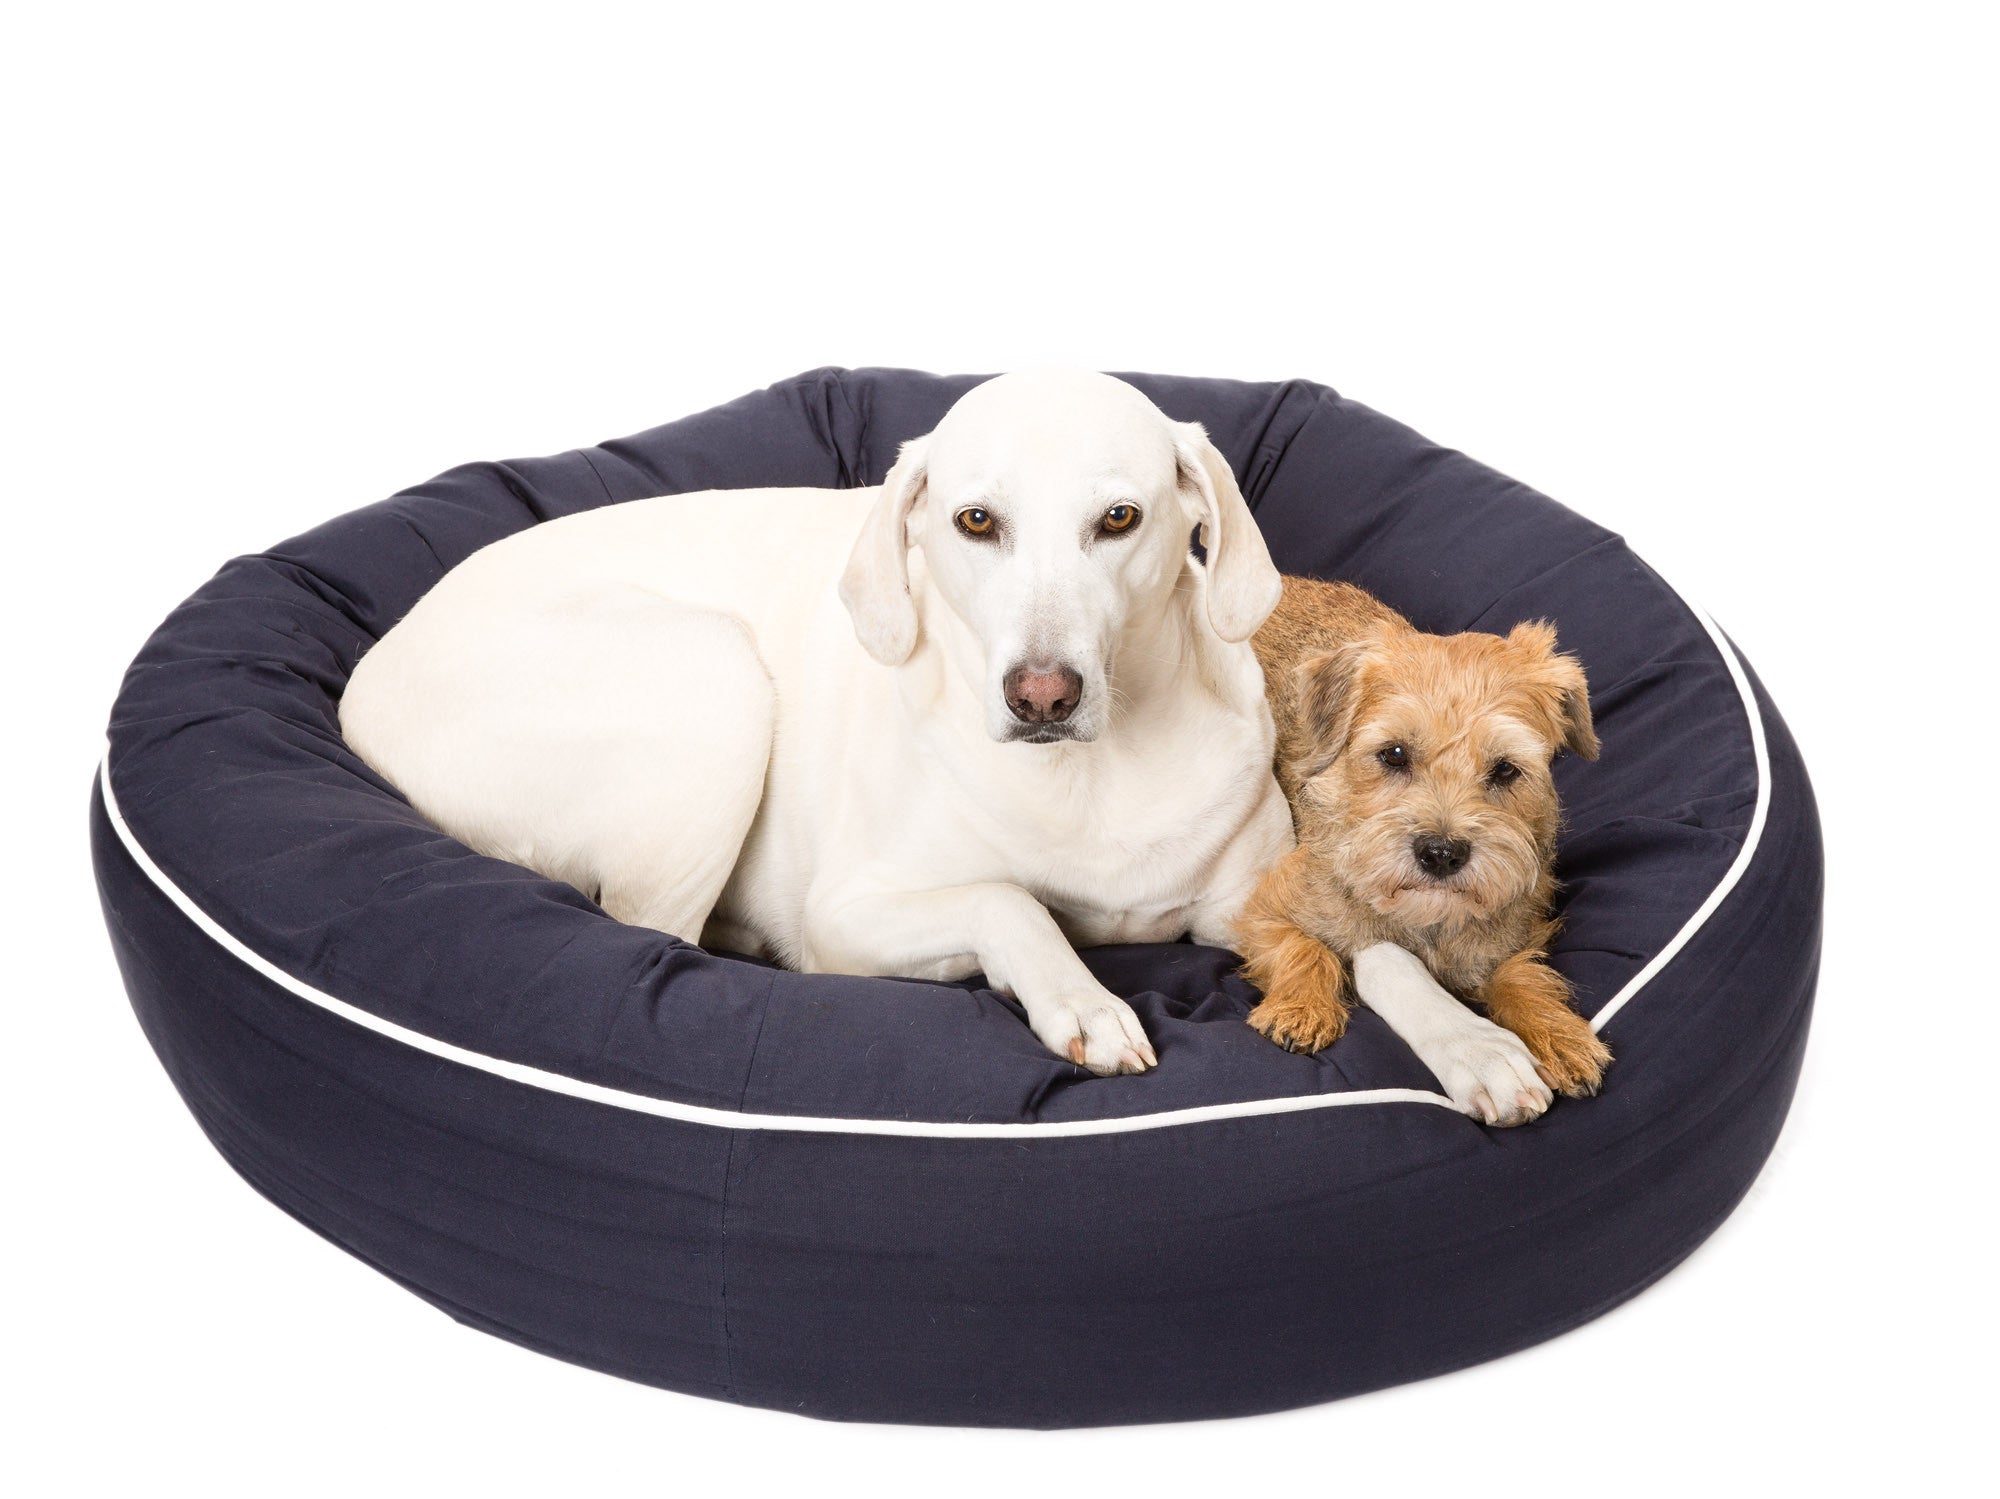 Canine Styles - Cotton Canvas Beds - Solid Colors w/Off White Piping - Dog Beds - 7 Color Options